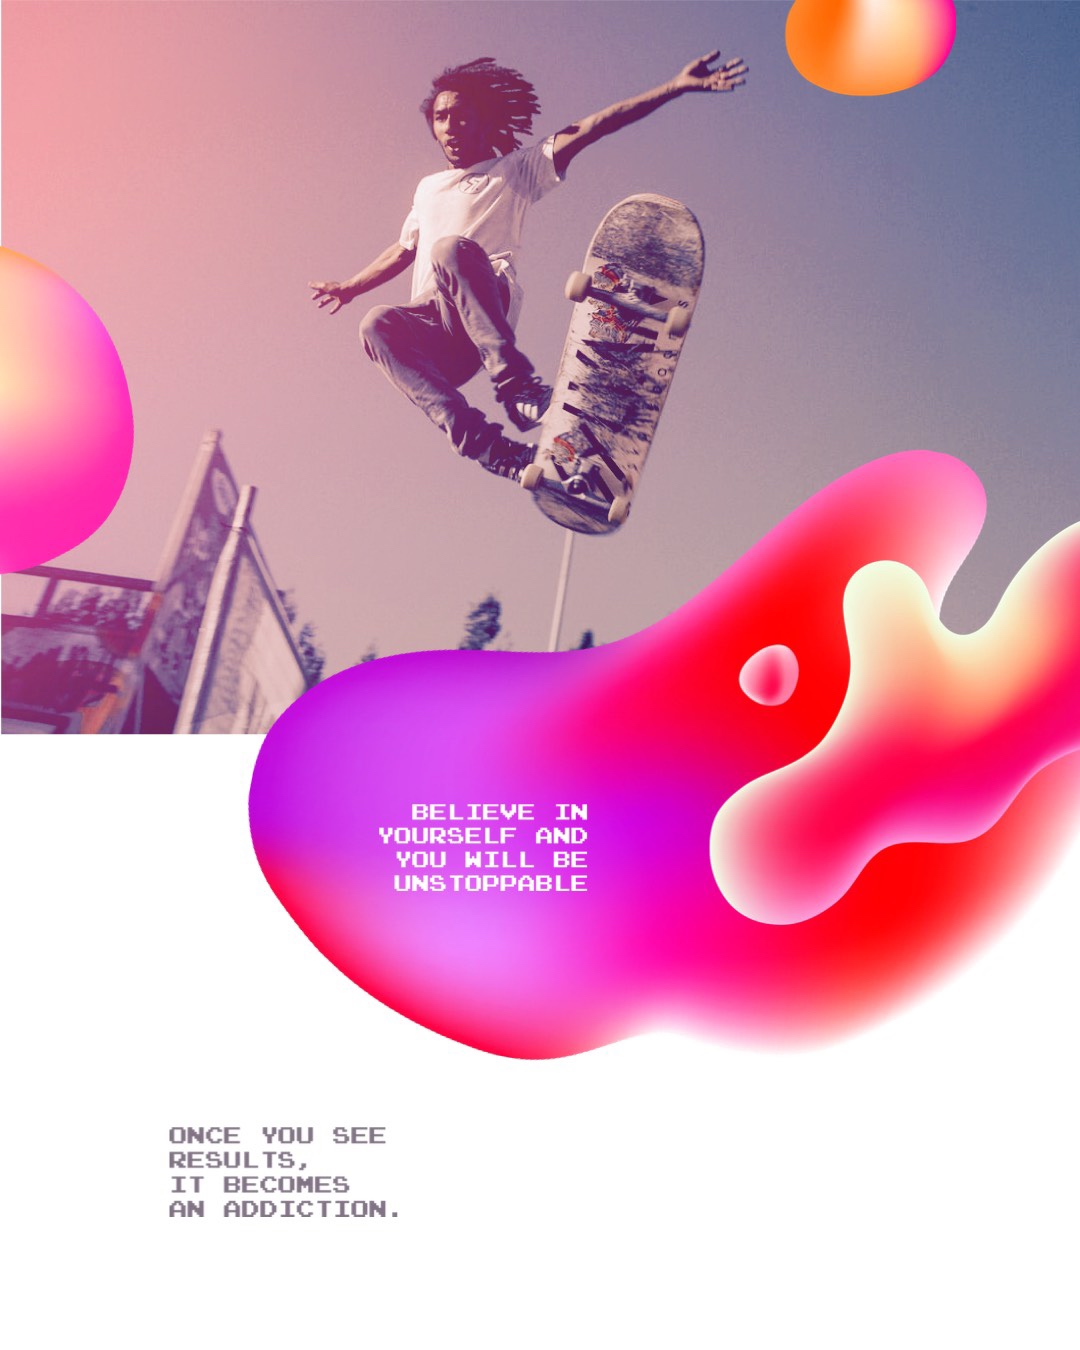 A Skateboarder Is Doing A Trick In The Air Sports Template